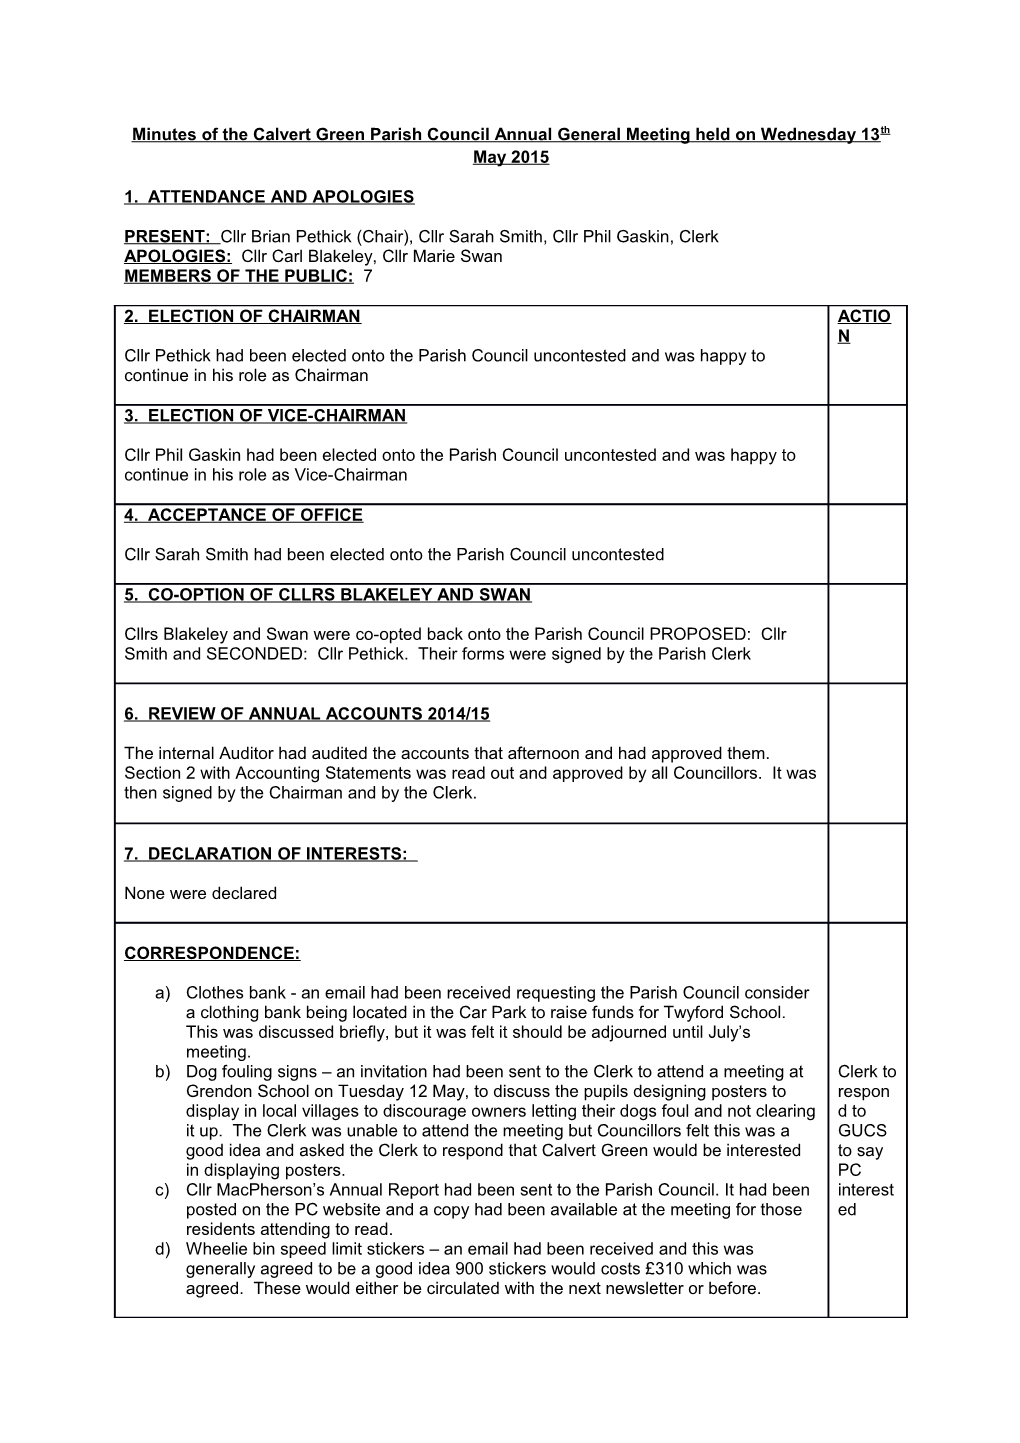 Minutes of the Calvert Green Parish Council Meeting Held on Tuesday 28Th April 2015